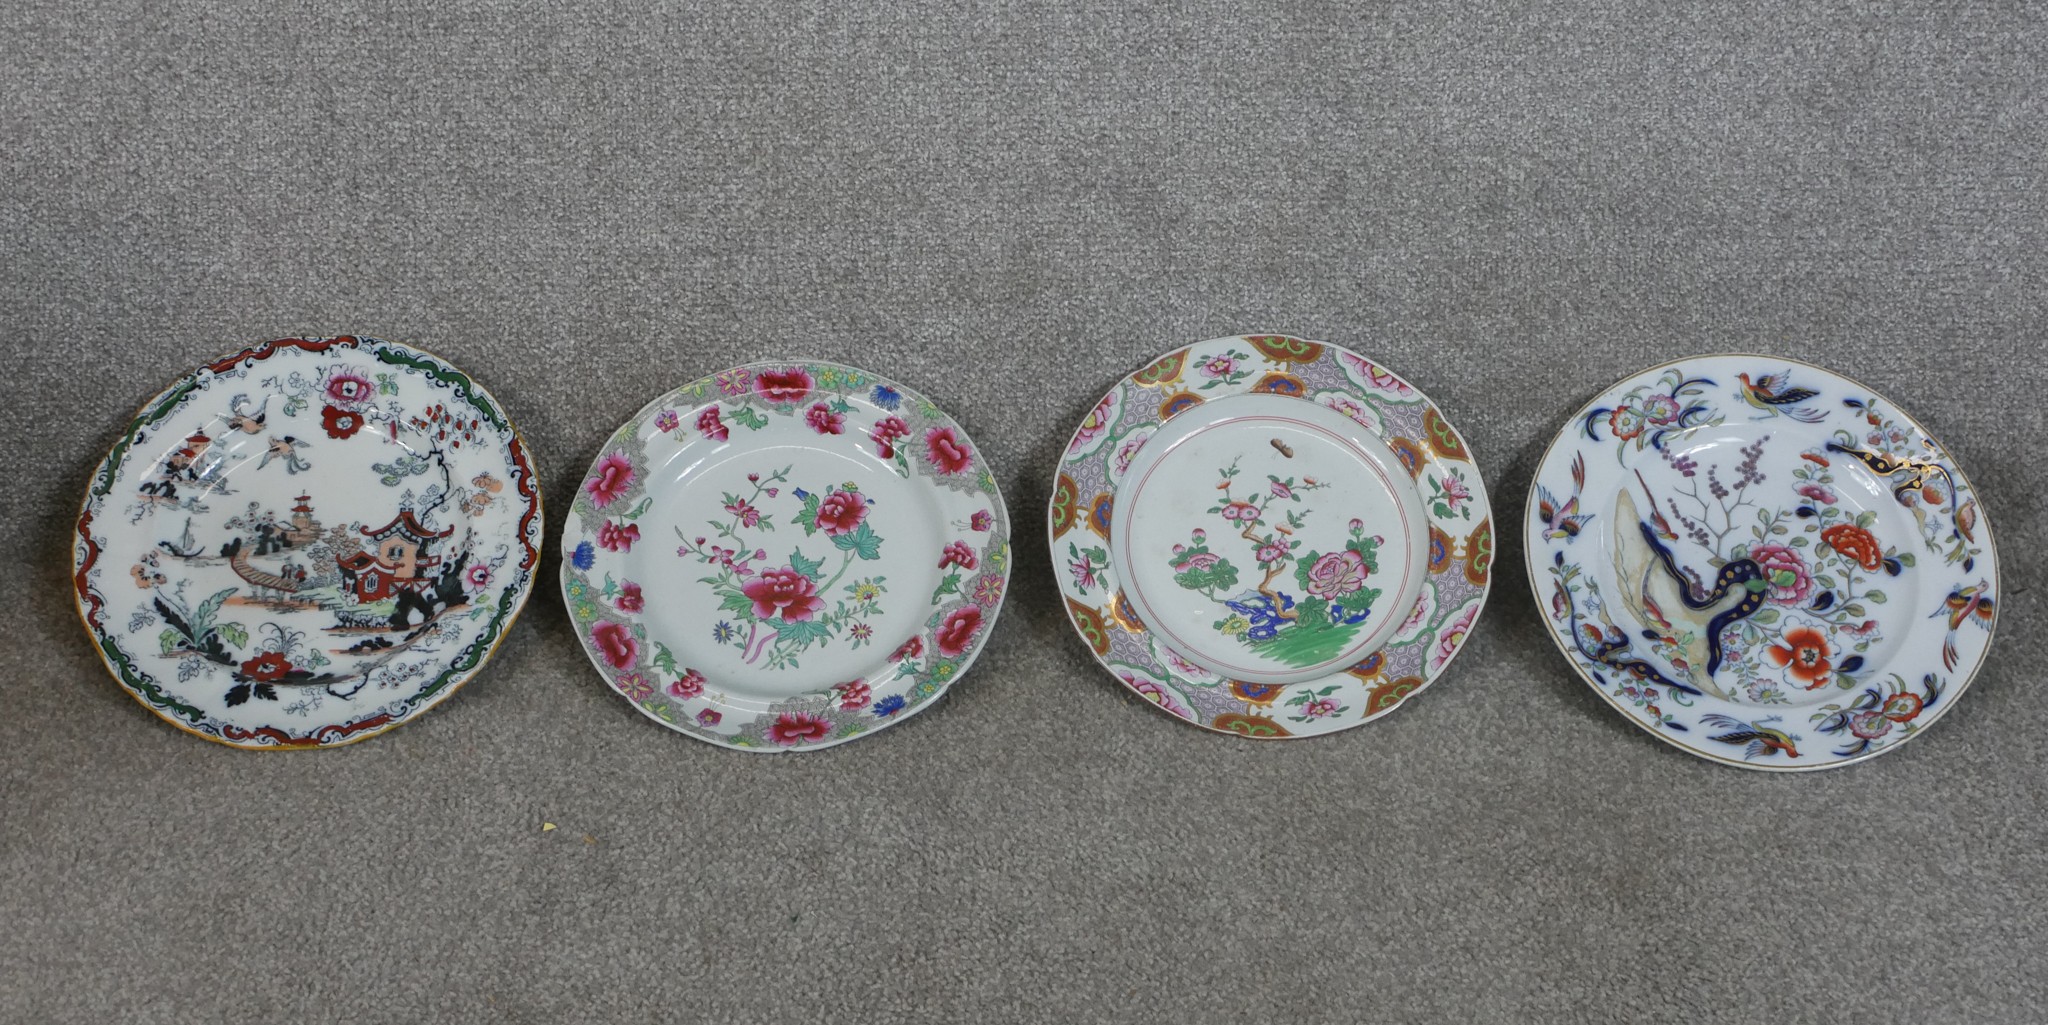 Three early 19th century painted Spode stoneware plates decorated with flowers, together with a 19th